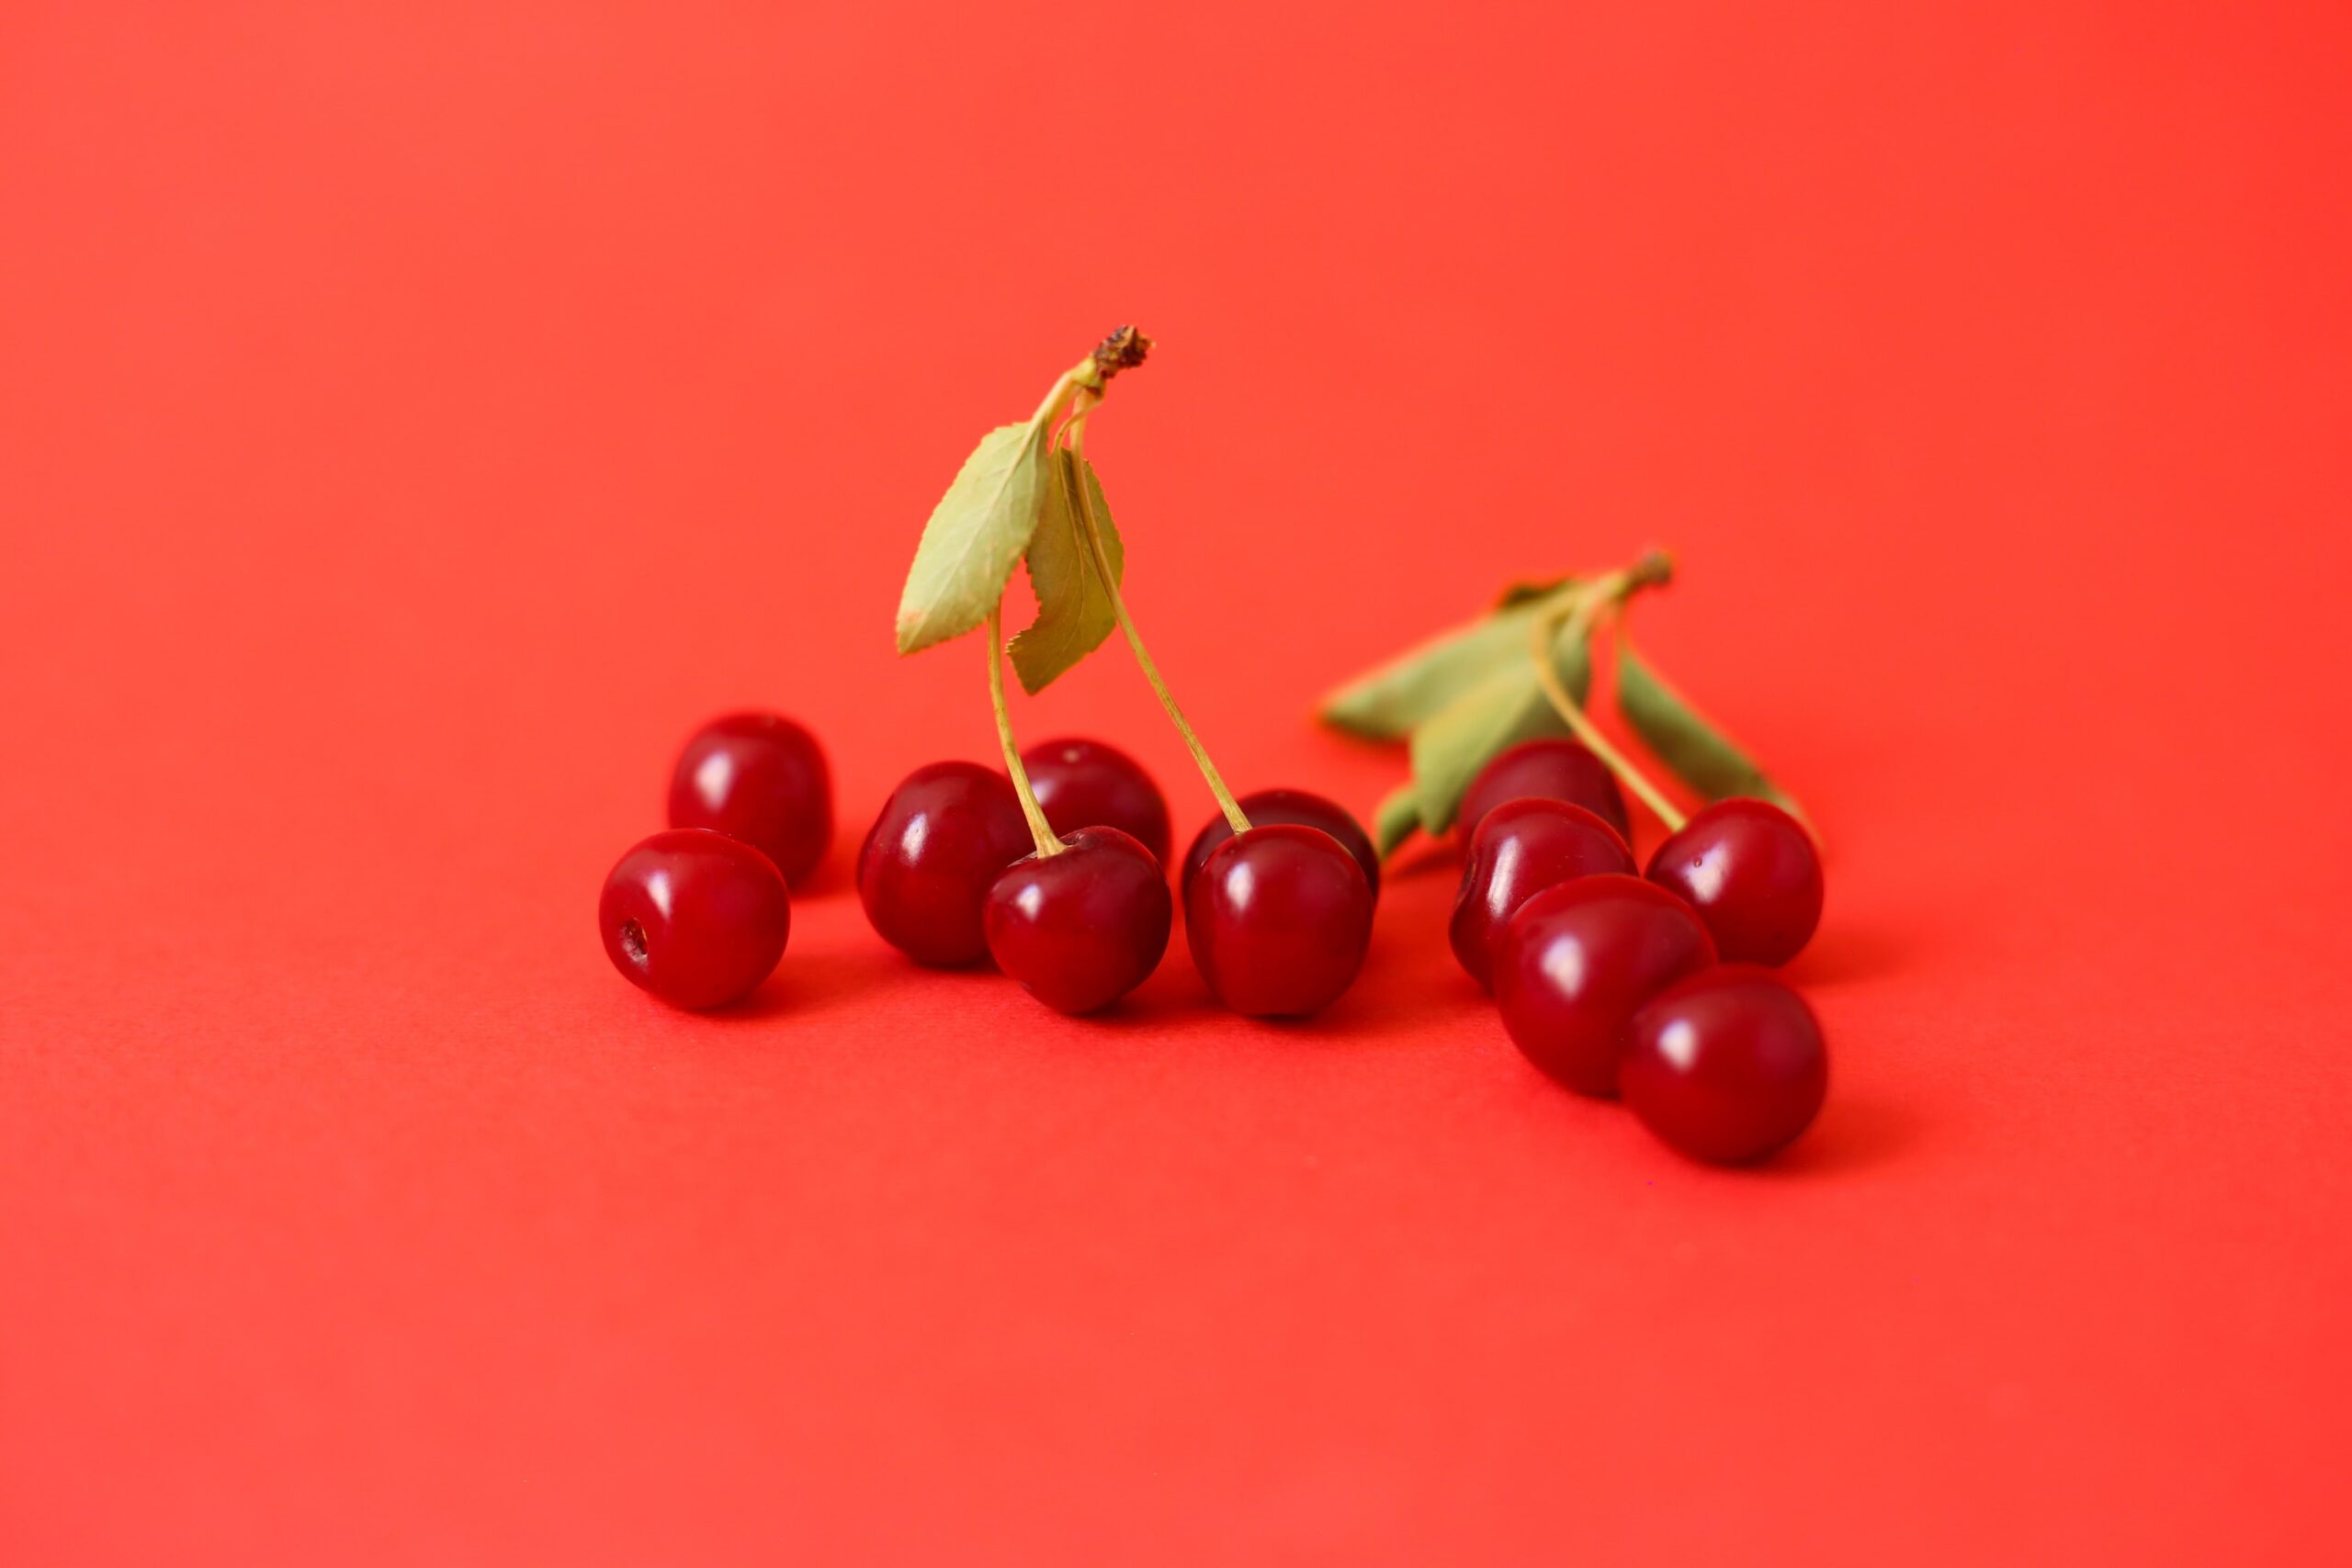 red round fruits on red surface